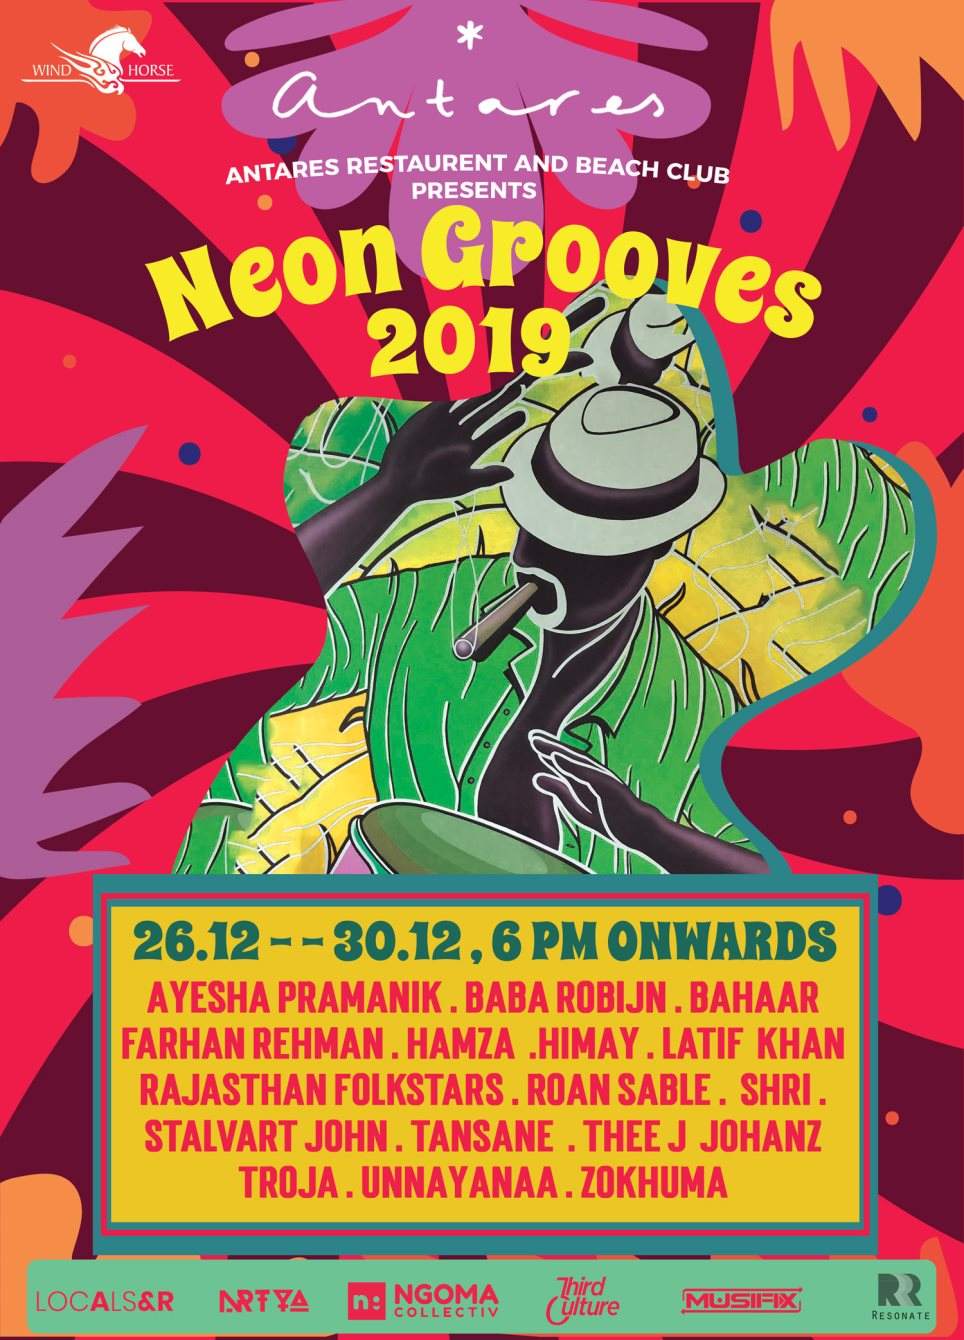 Neon Grooves 2019 - Página frontal